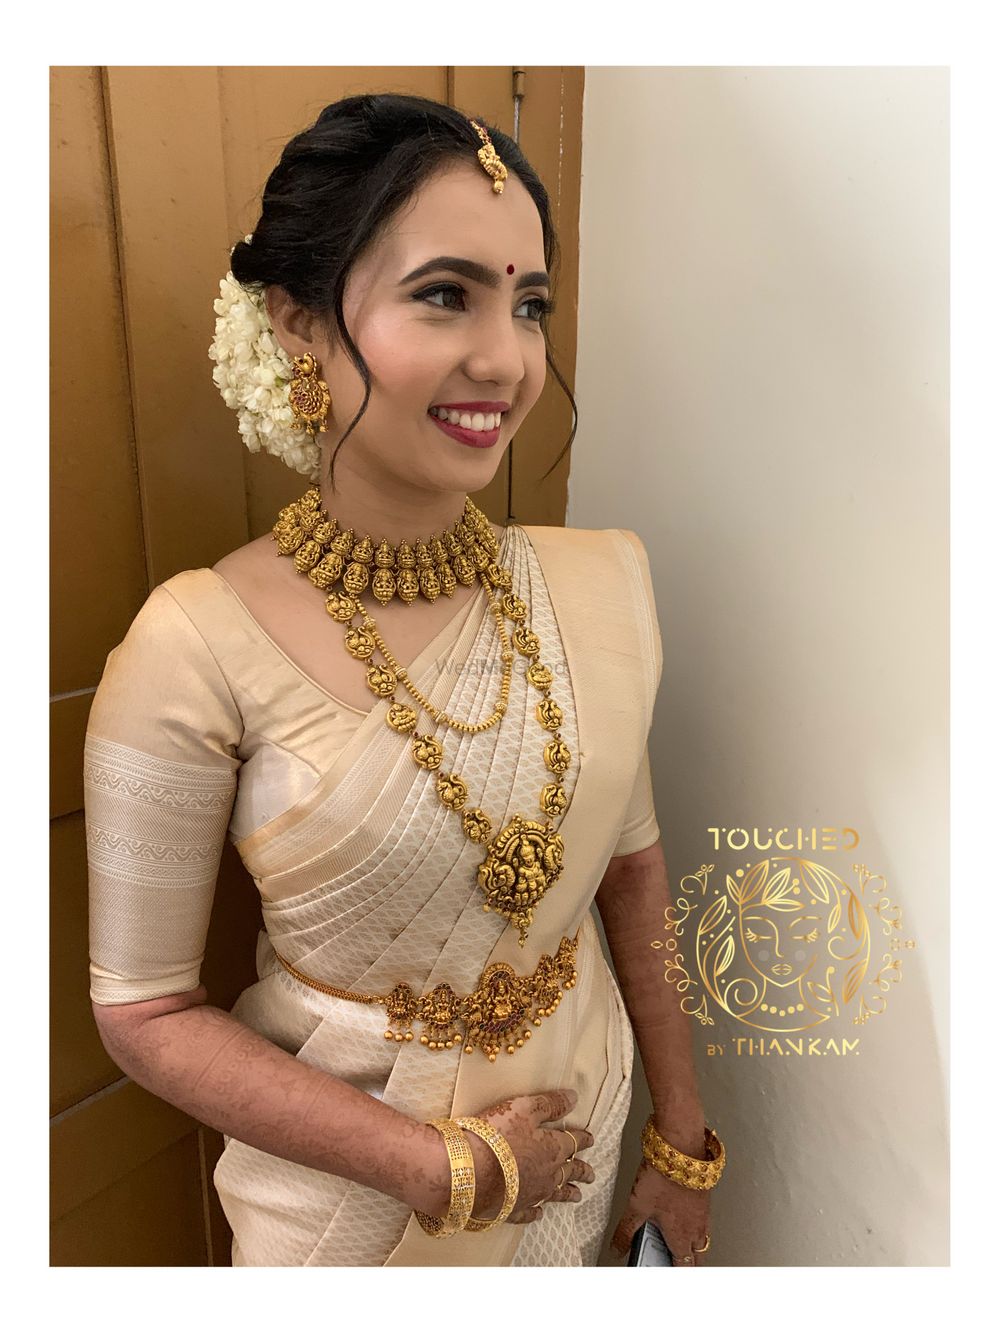 Photo From Hindu bride - By Touched by Thankam